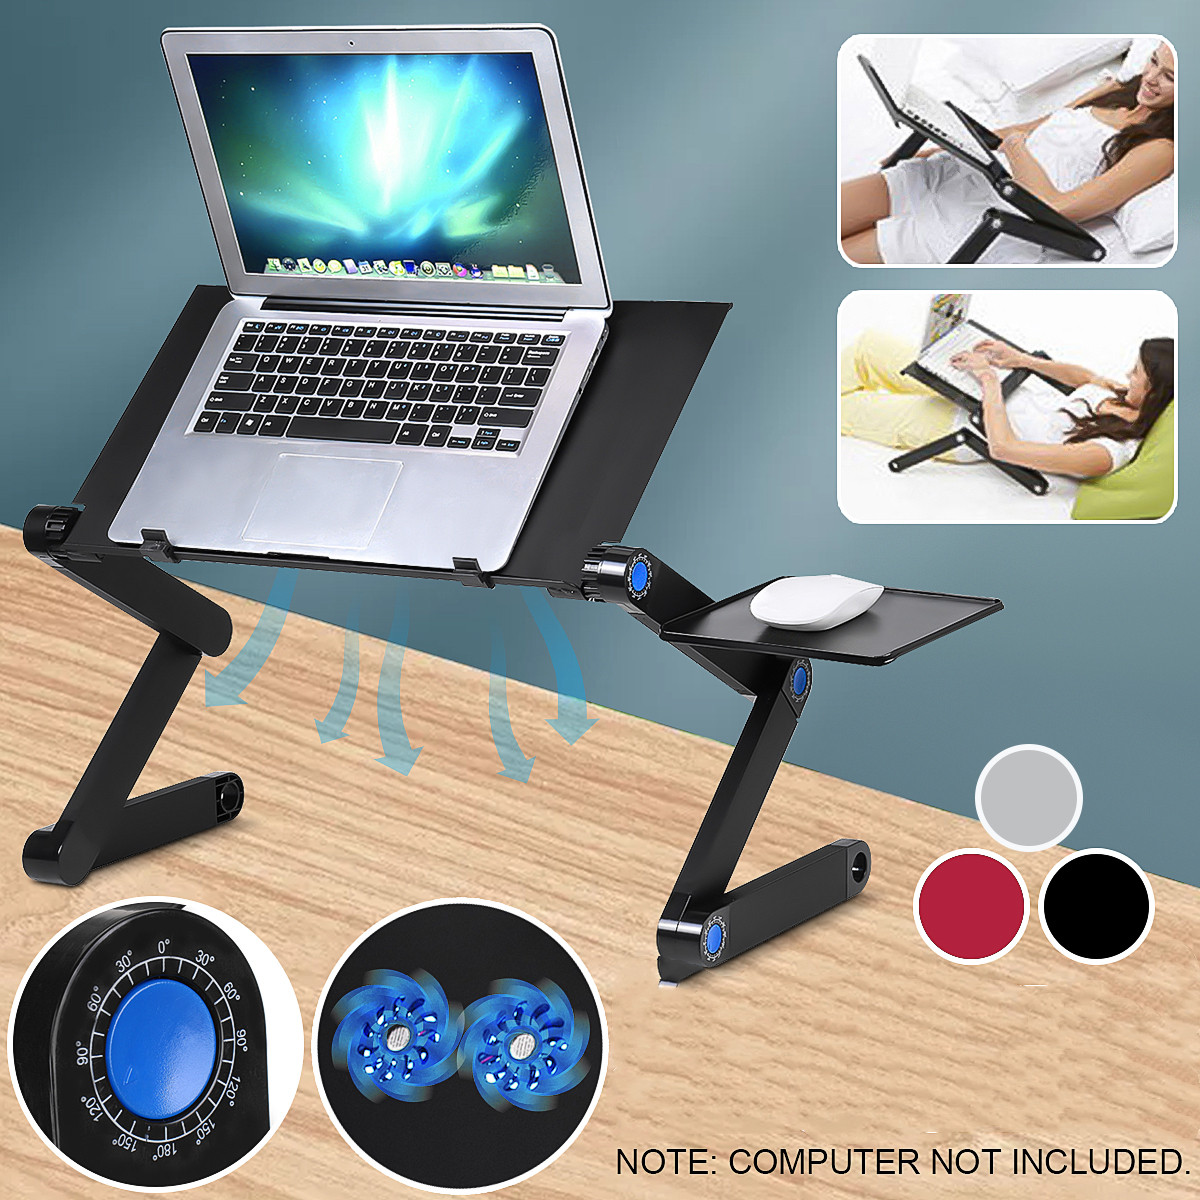 Cooling-Laptop-Desk-360-Degree-Aluminum-Alloy-Adjustable-Foldable-Cooling-Notebook-Table-for-Sofa-Be-1786133-2